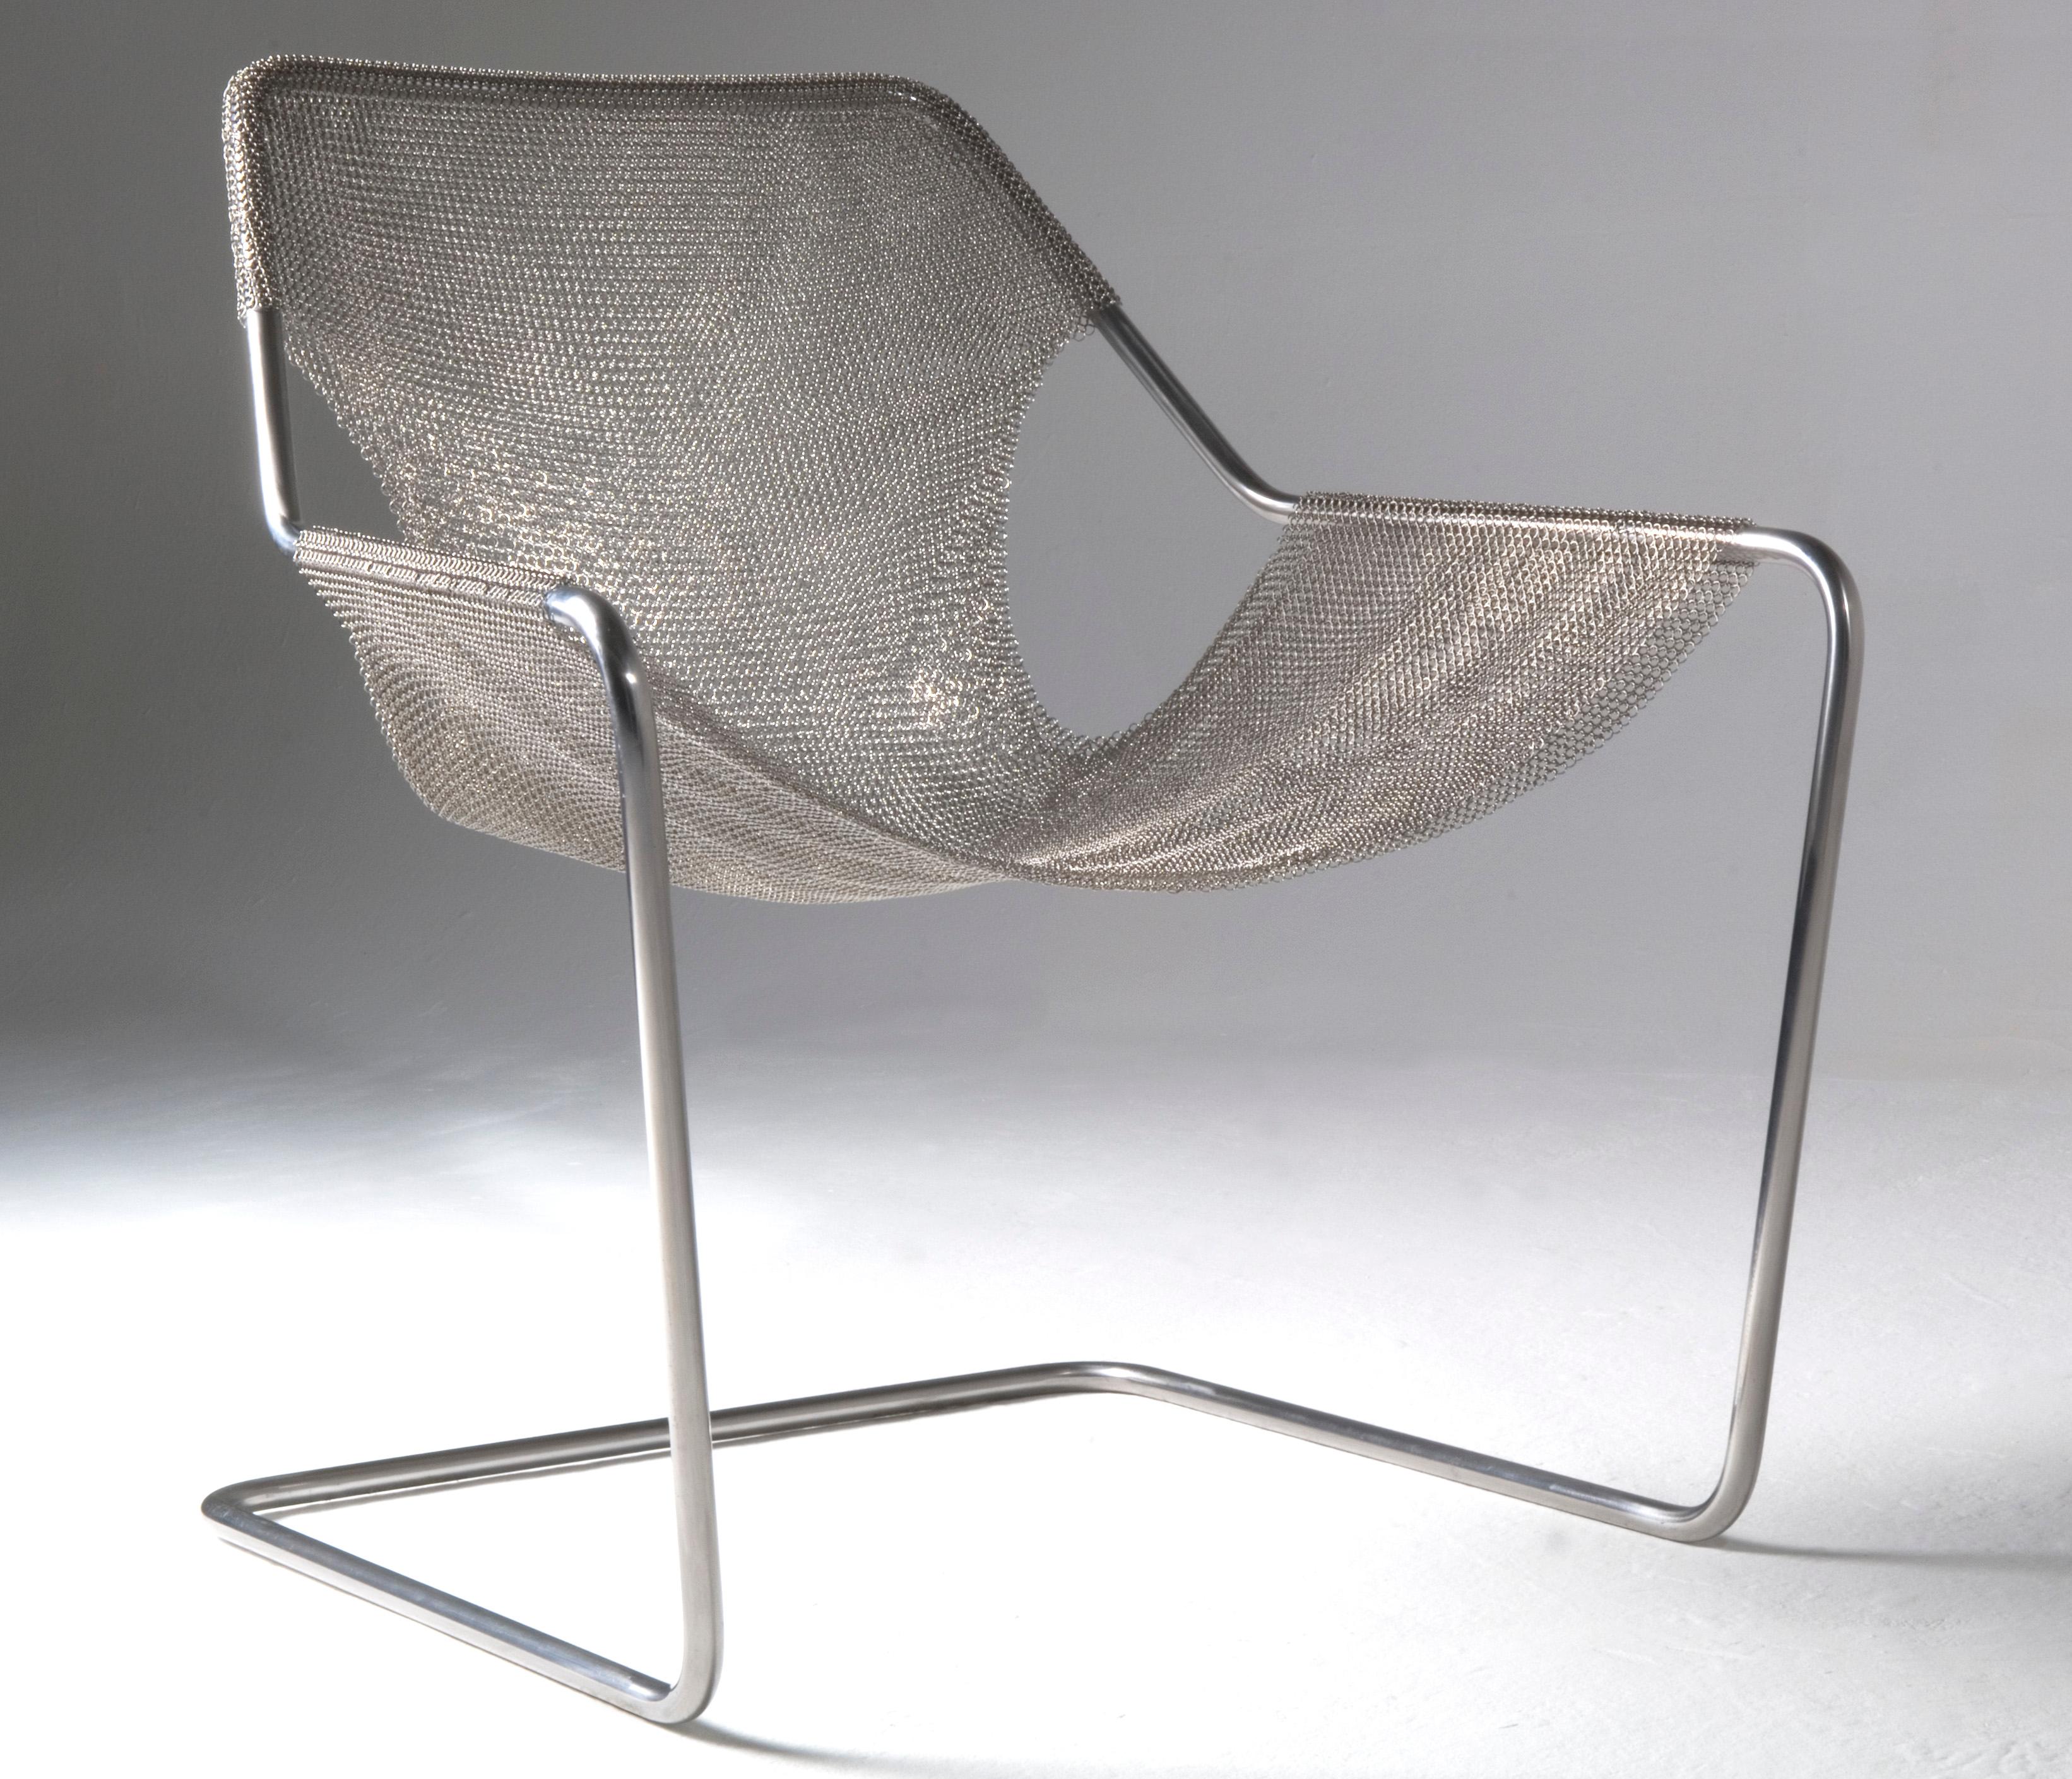 A cult chair signed by Multi-awarded Brazilian Architect Paulo Mendes da Rocha, one of the great masters of architecture, declined in a Mesh version. Very comfortable, the Paulistano is a design classic with a timeless elegance.
This 100% stainless